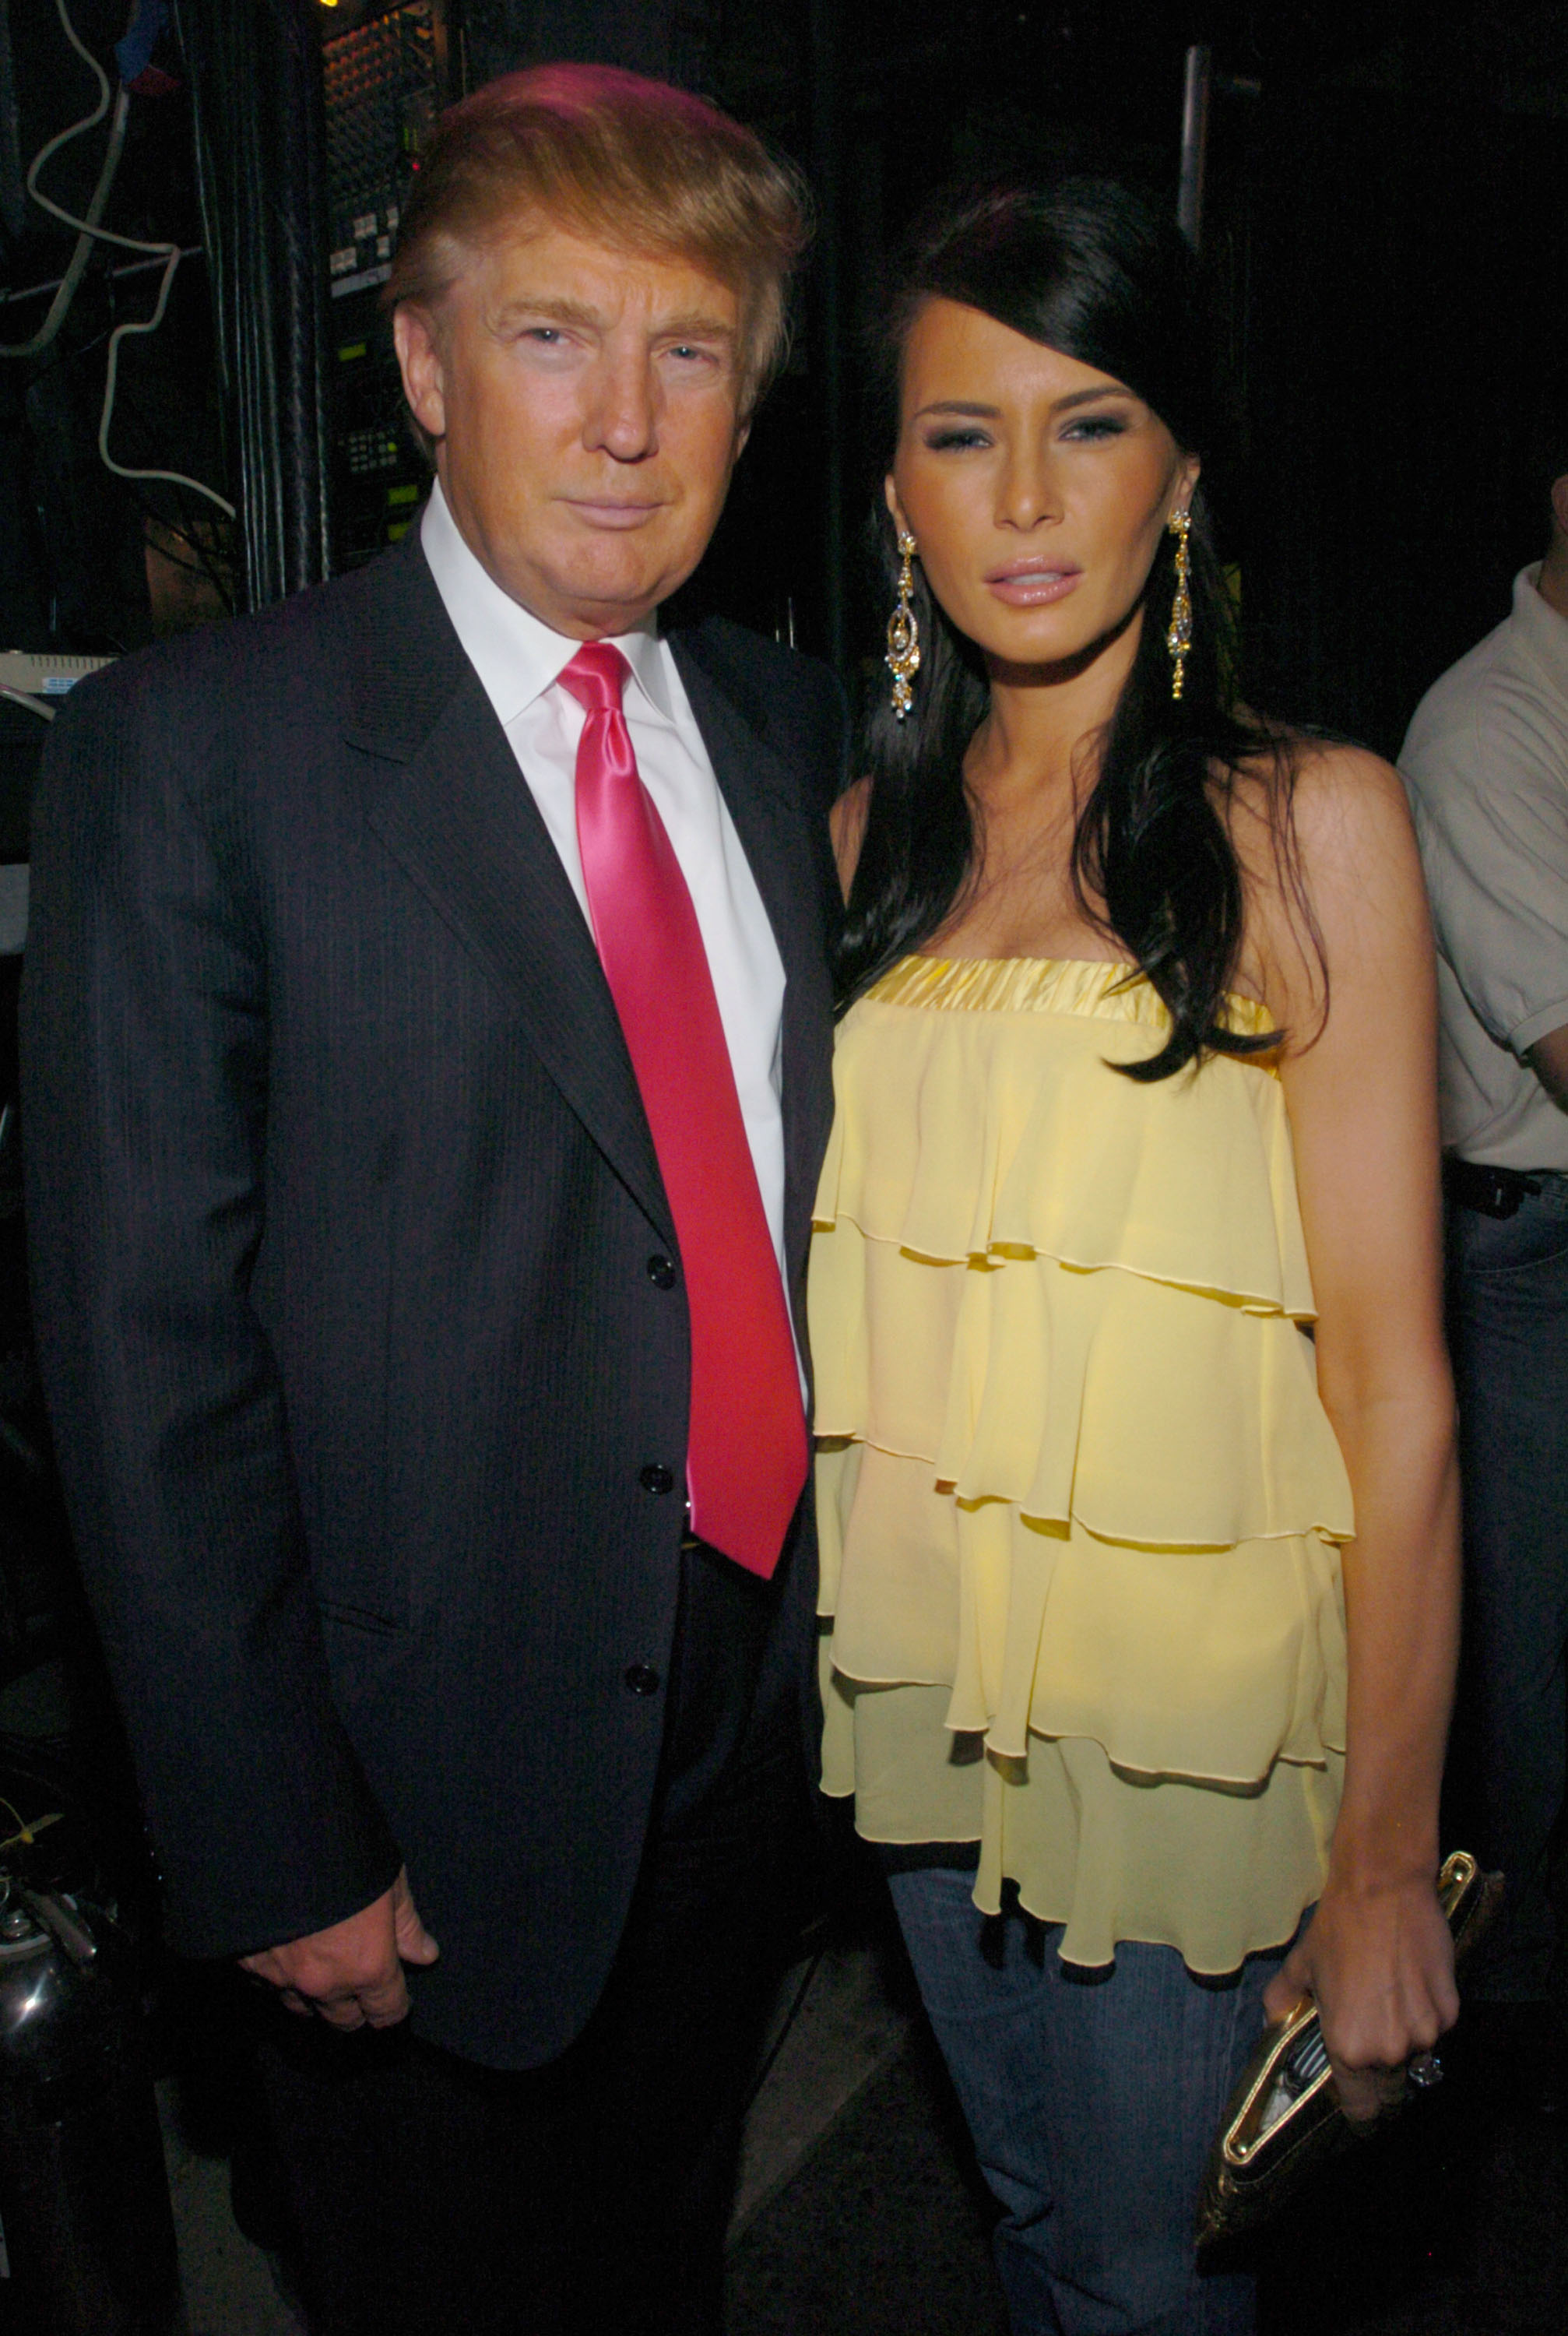 Donald Trump and Melania Knauss during Z100's Zootopia 2004 - Backstage at Madison Square Garden in New York City, New York, United States. (Photo by KMazur/WireImage for Clear Channel Entertainment)